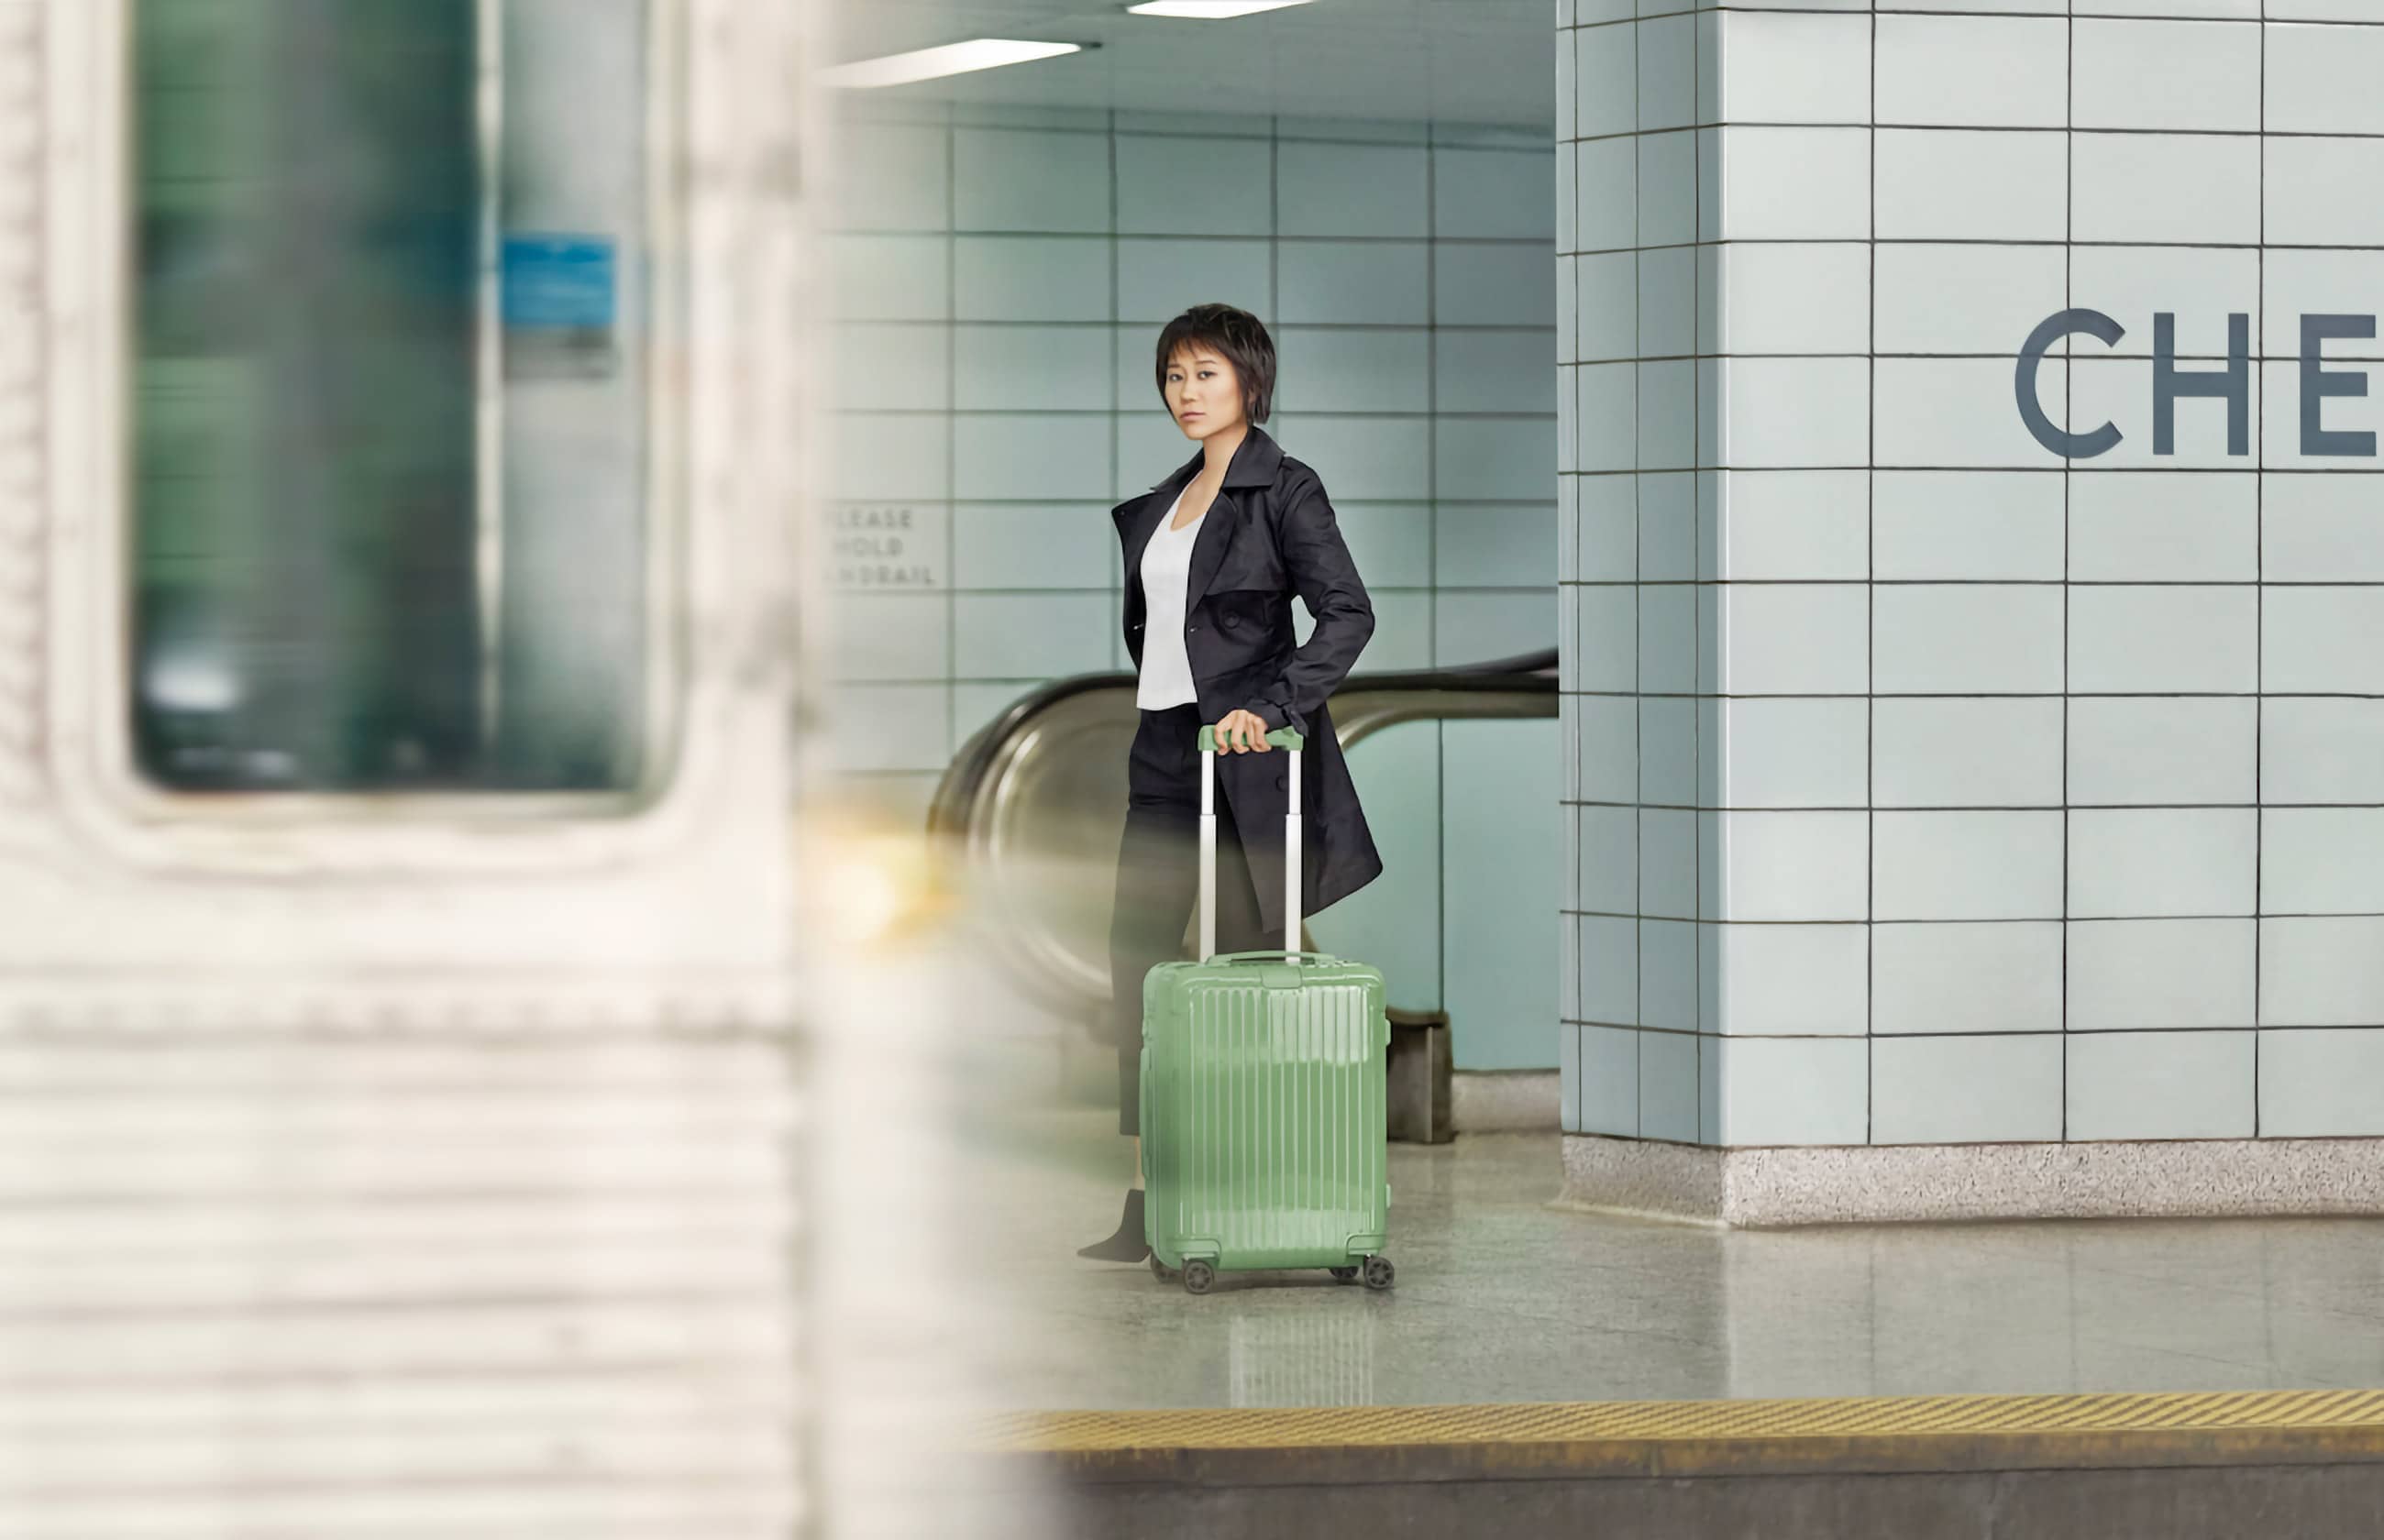 Rimowa collaborates with Chinese Pianist Yuja Wang for their latest campaign